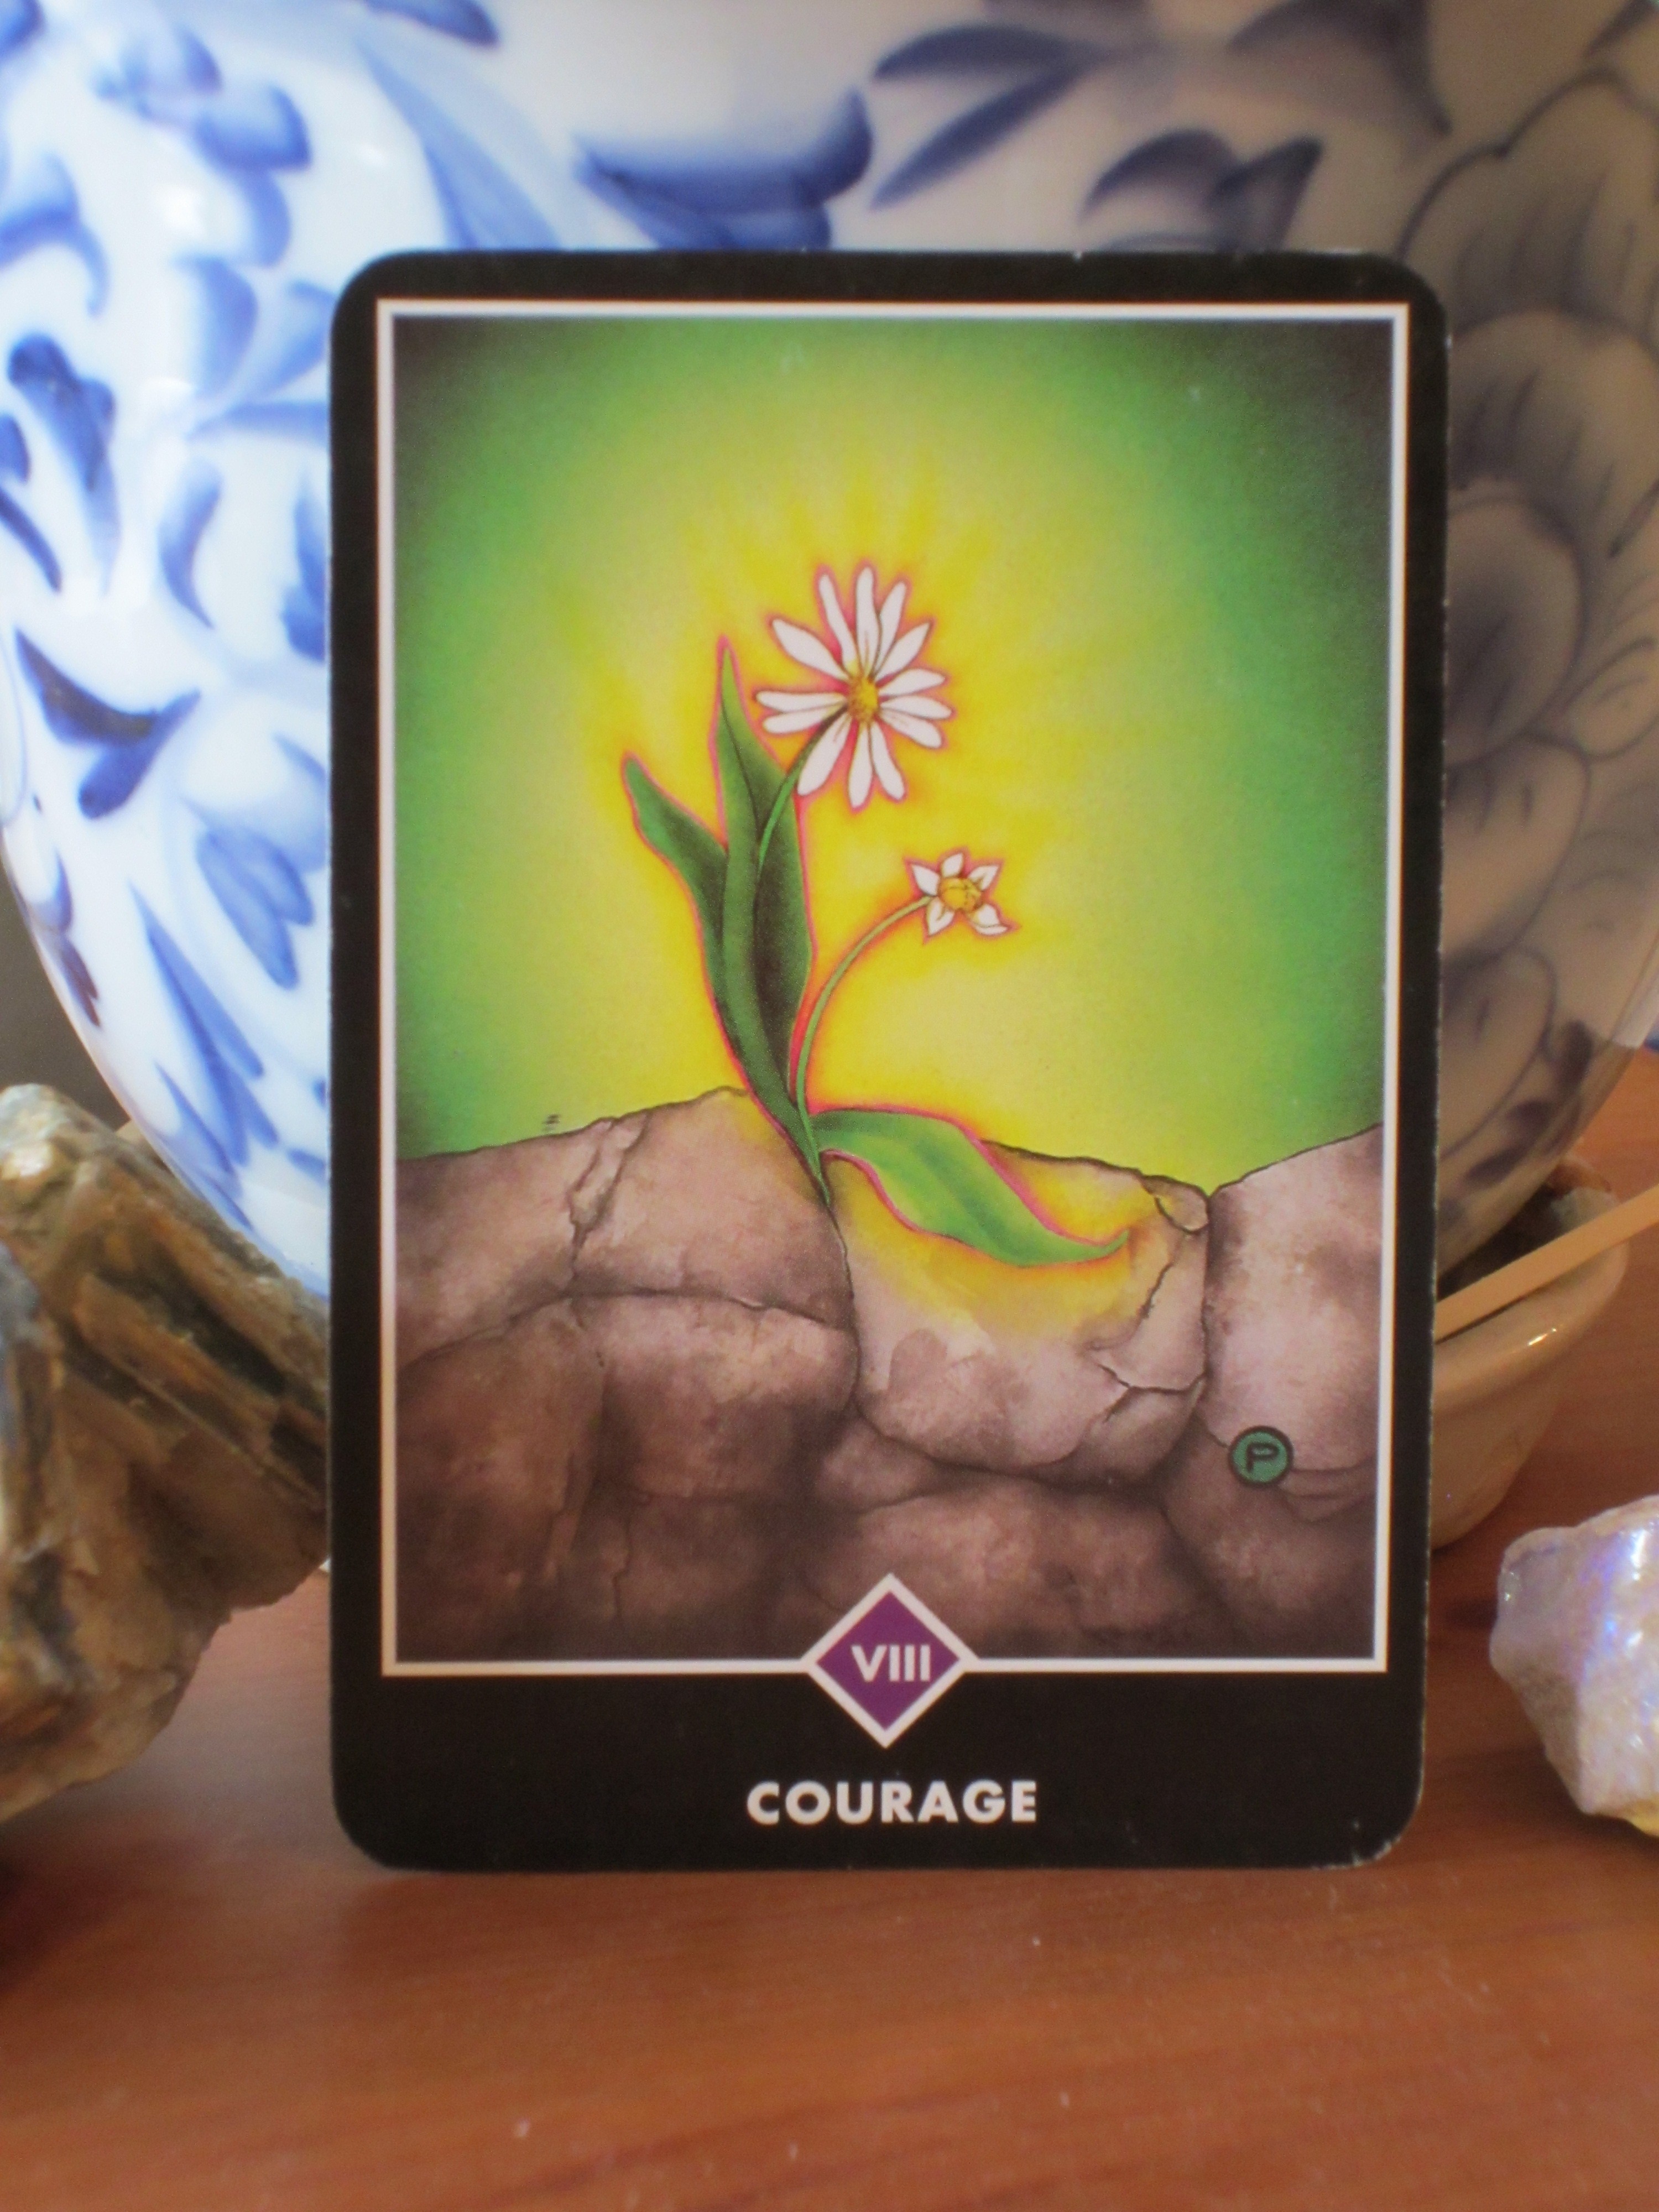 Osho Zen Tarot - Courage (8 of MA, also known as Strength). A daisy has pushed its way up through the concrete and is blooming, blooming, blooming